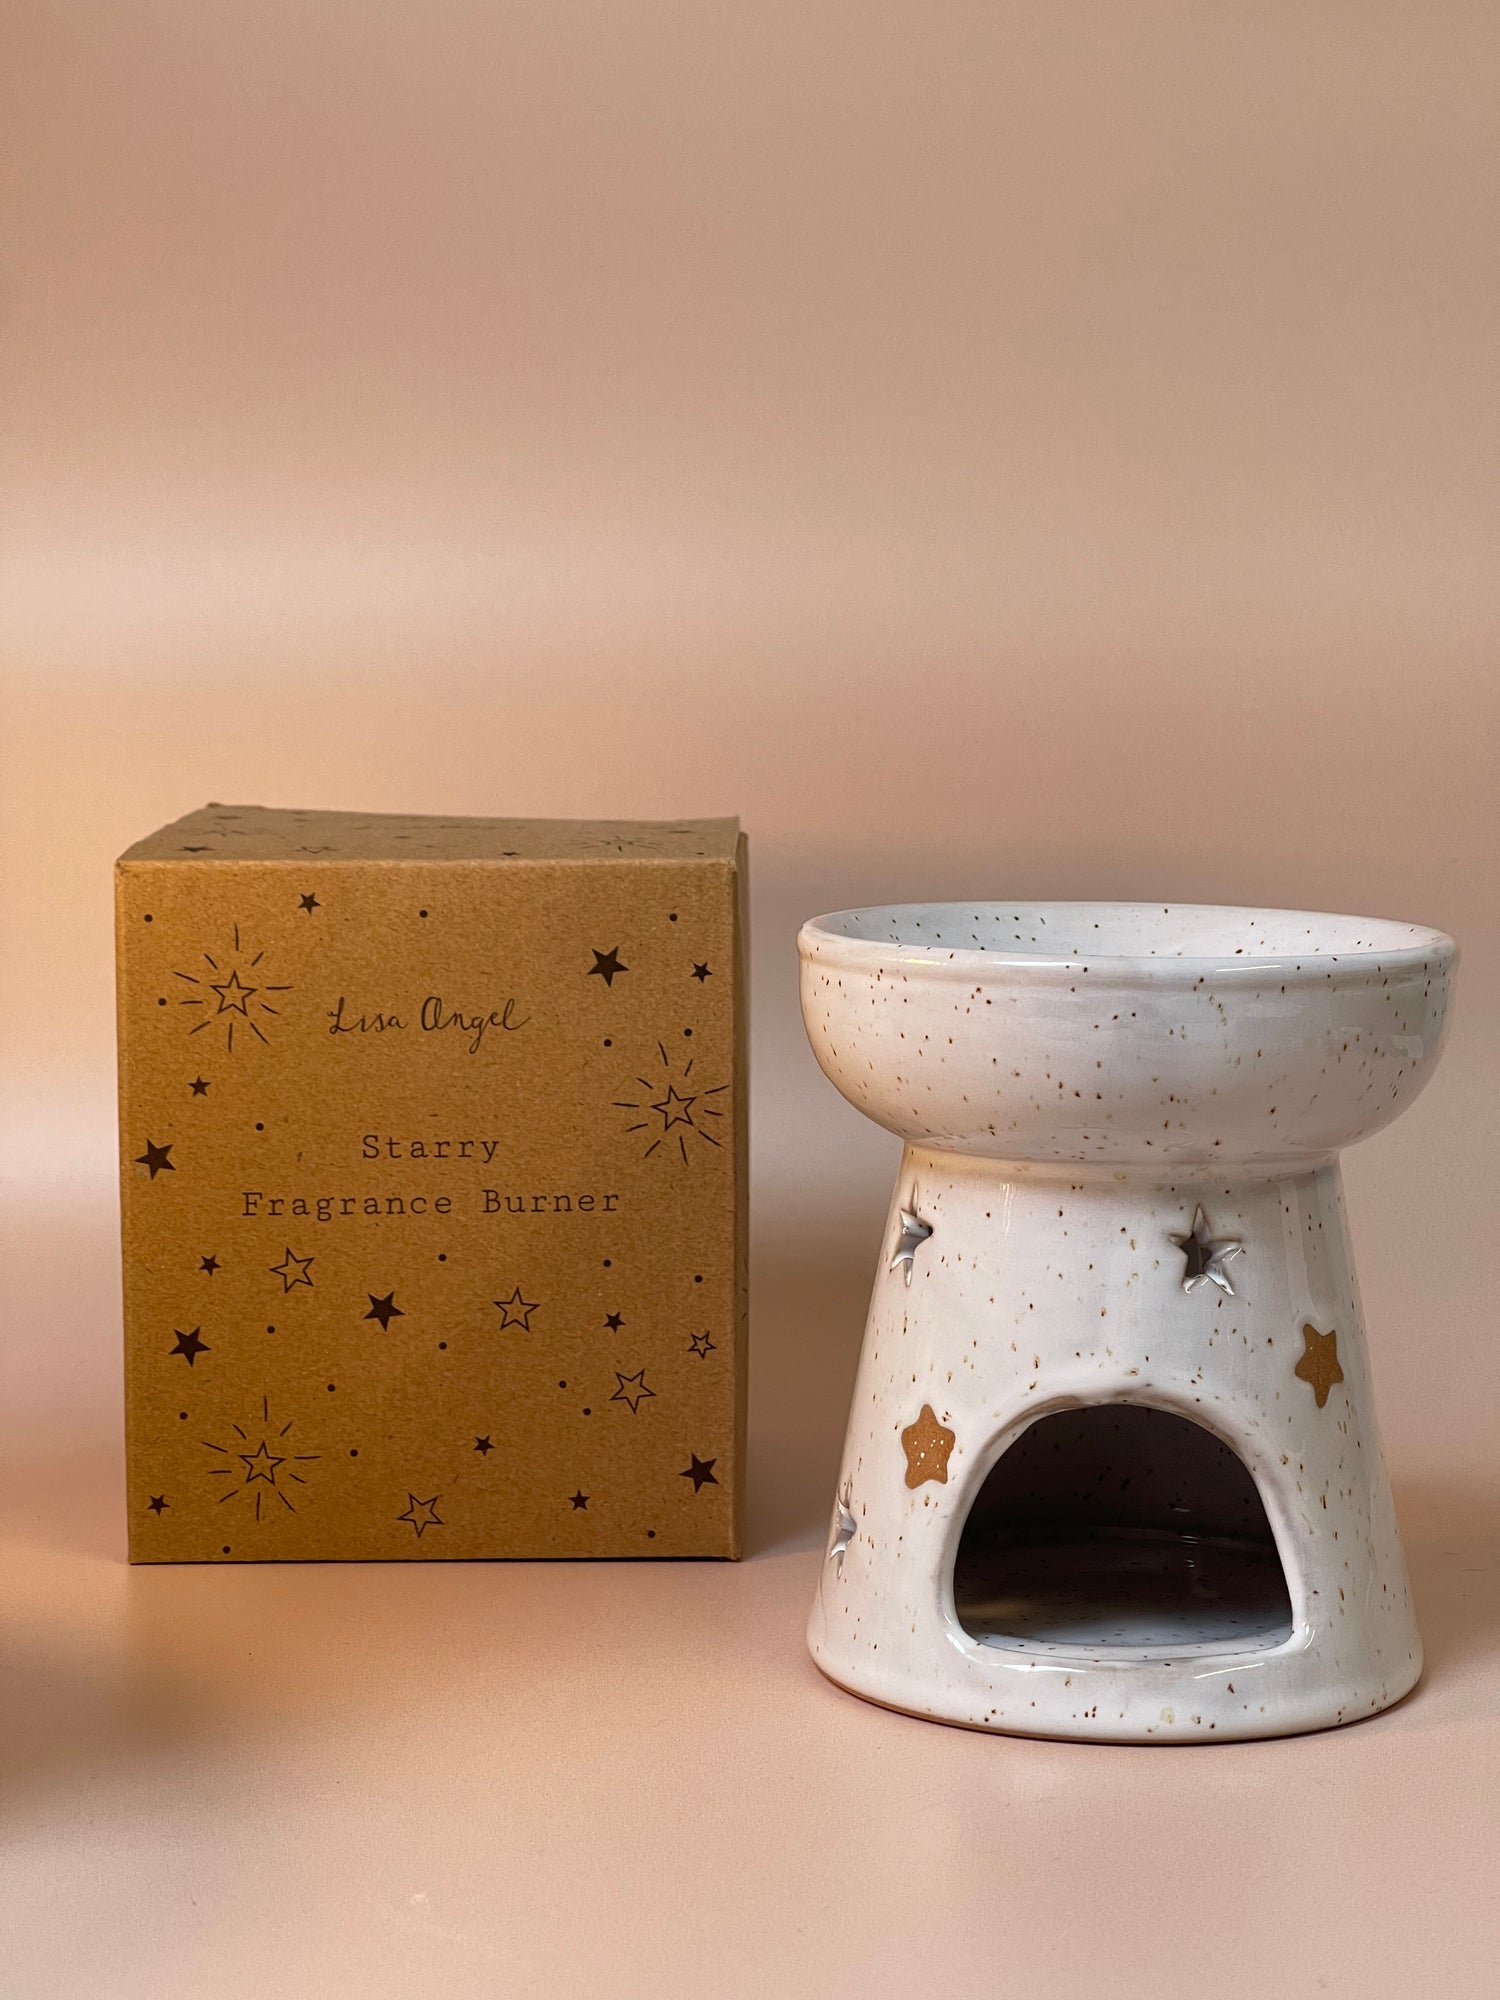 Starry-themed wax melt burner featuring a celestial design, perfect for melting wax melts and infusing your space with luxury fragrances.